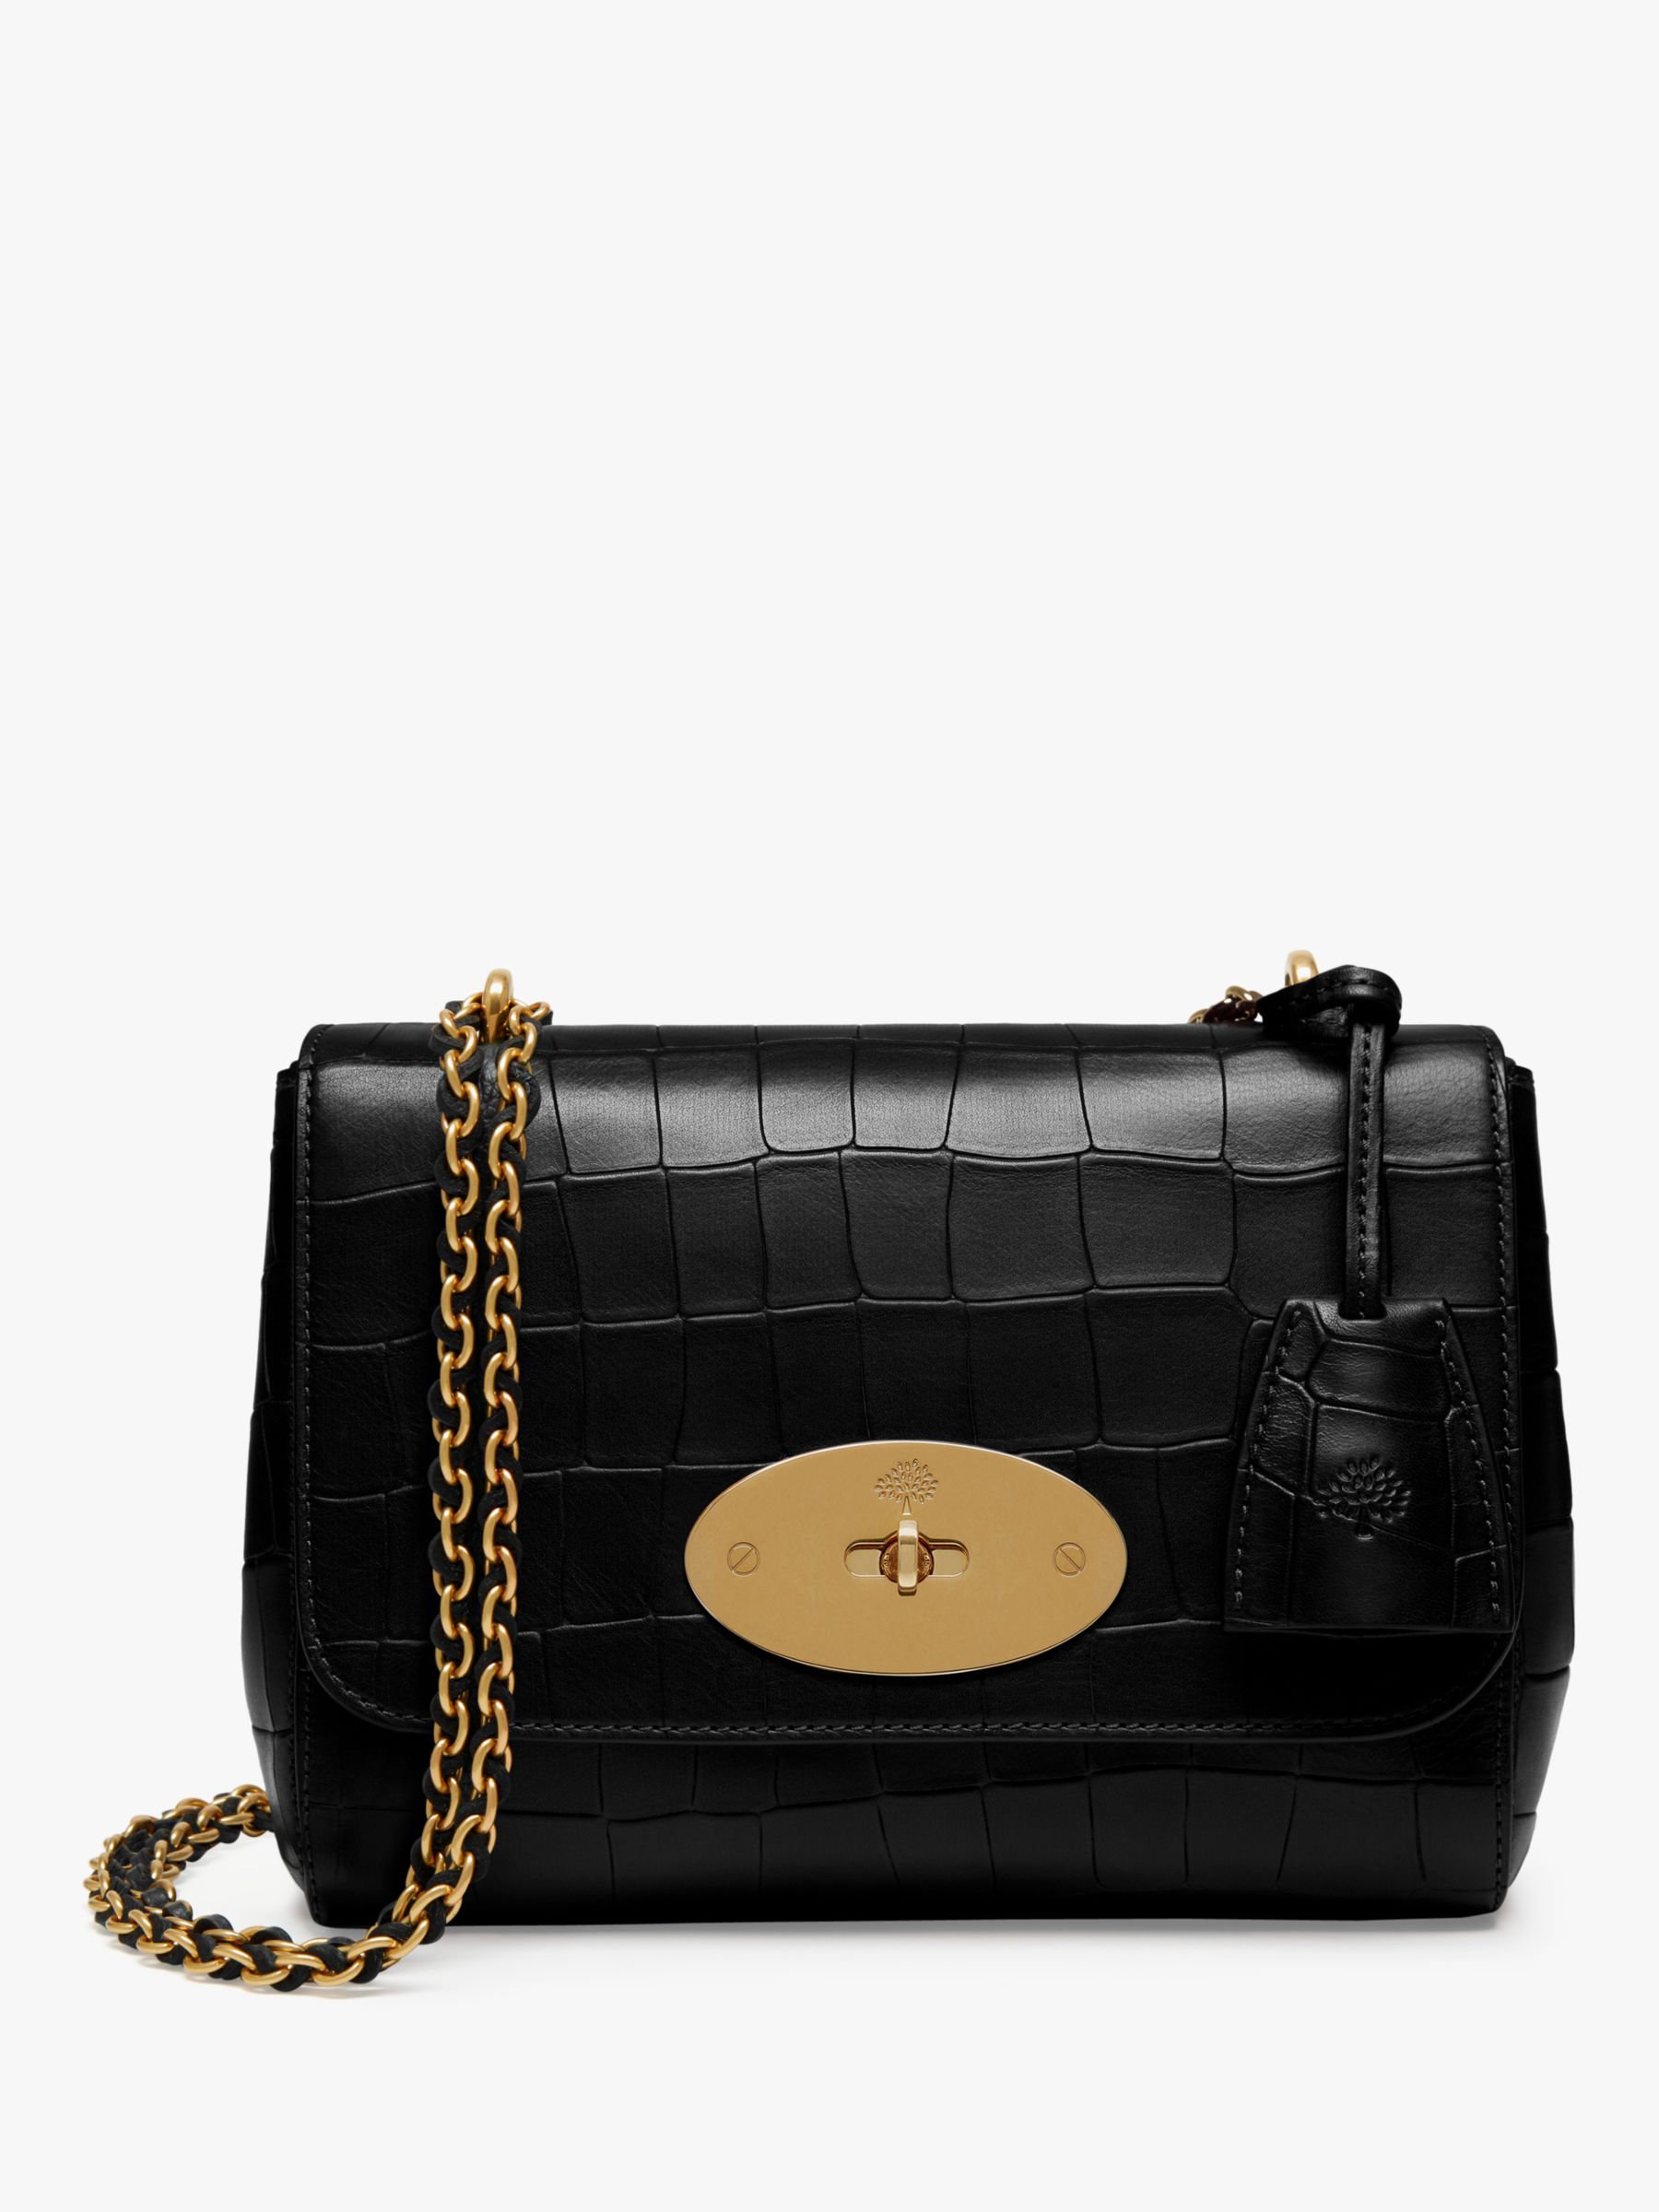 Mulberry Lily Croc Embossed Leather Cross Body Bag, Black/Gold at John Lewis & Partners